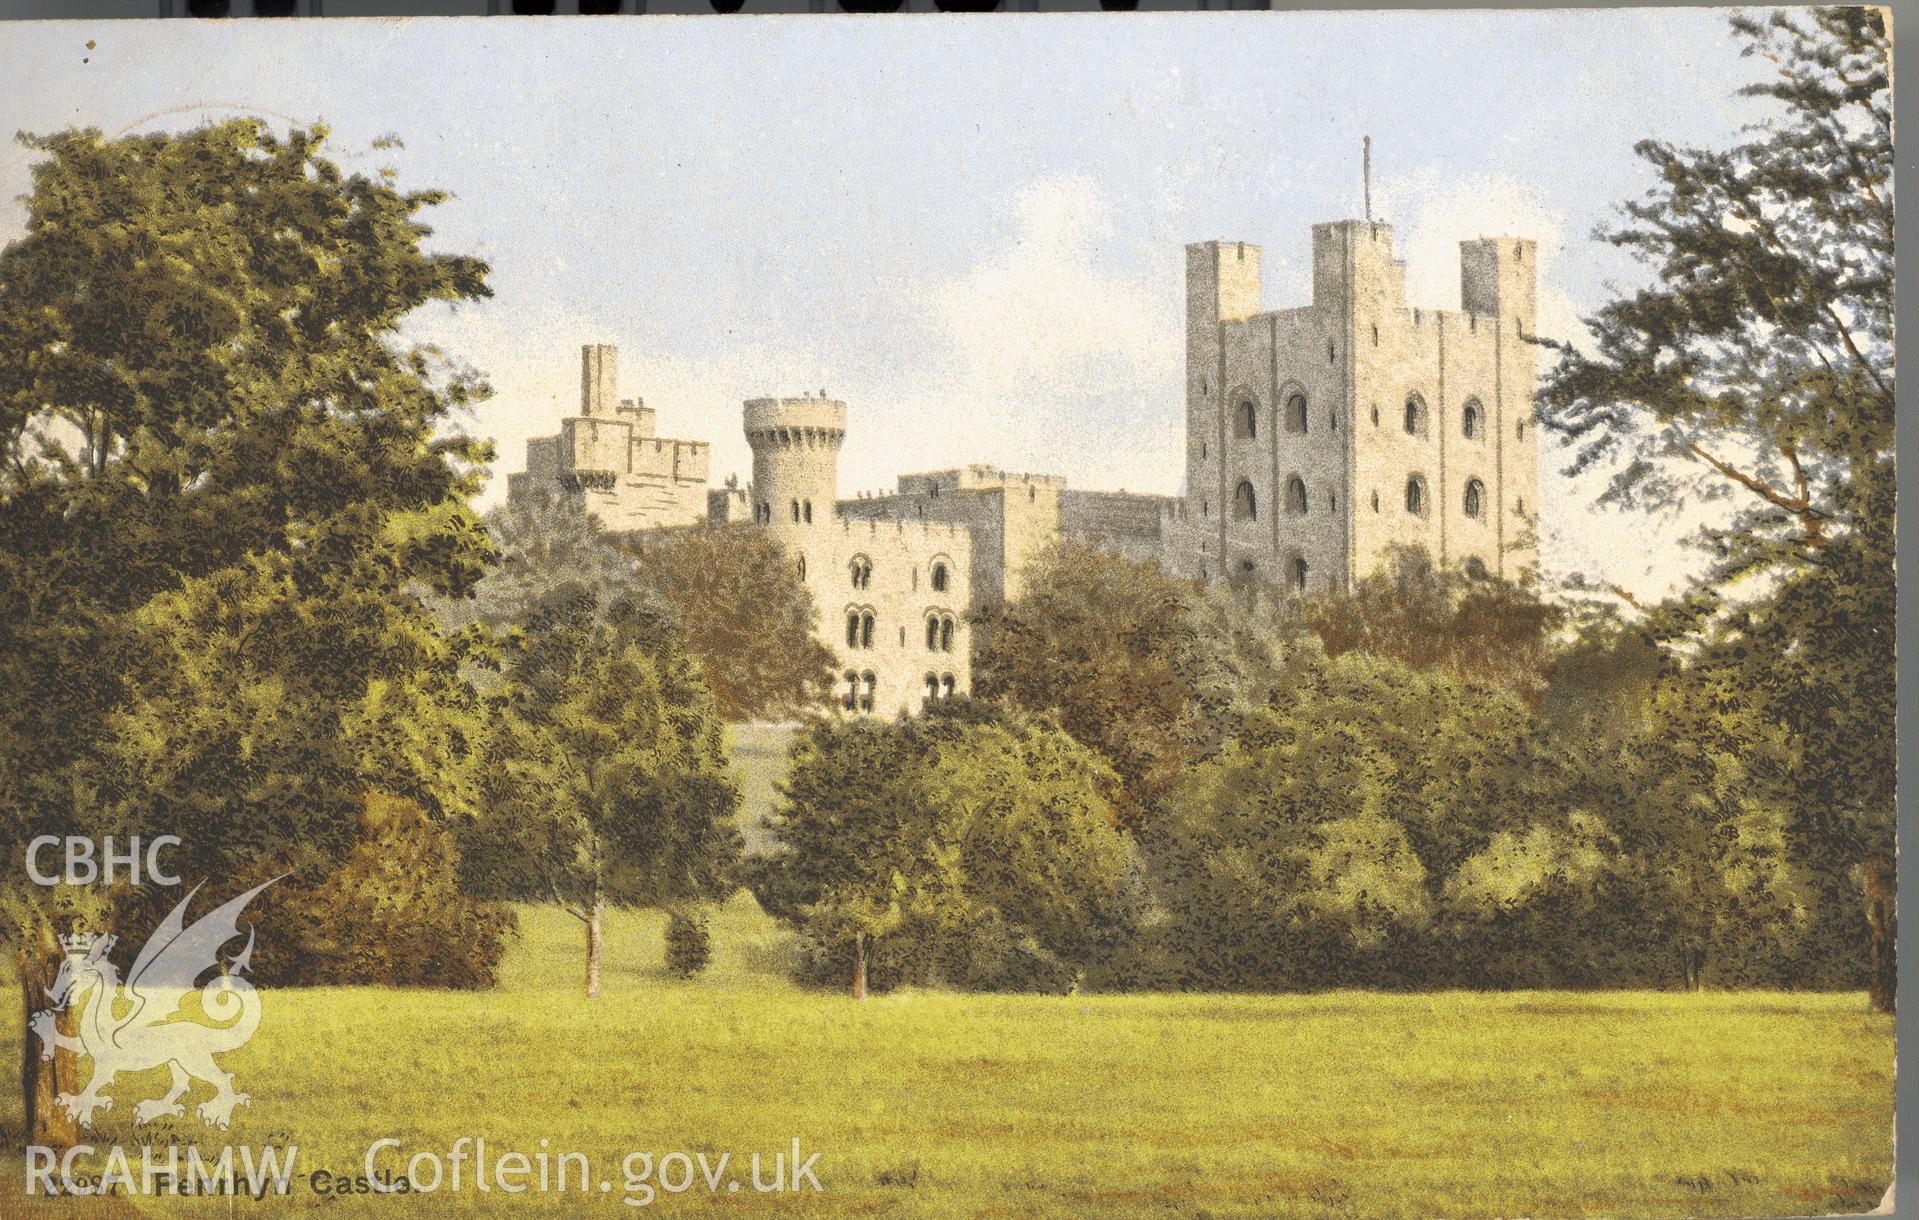 Digitised postcard image of Penrhyn Castle, Bangor. Produced by Parks and Gardens Data Services, from an original item in the Peter Davis Collection at Parks and Gardens UK. We hold only web-resolution images of this collection, suitable for viewing on screen and for research purposes only. We do not hold the original images, or publication quality scans.